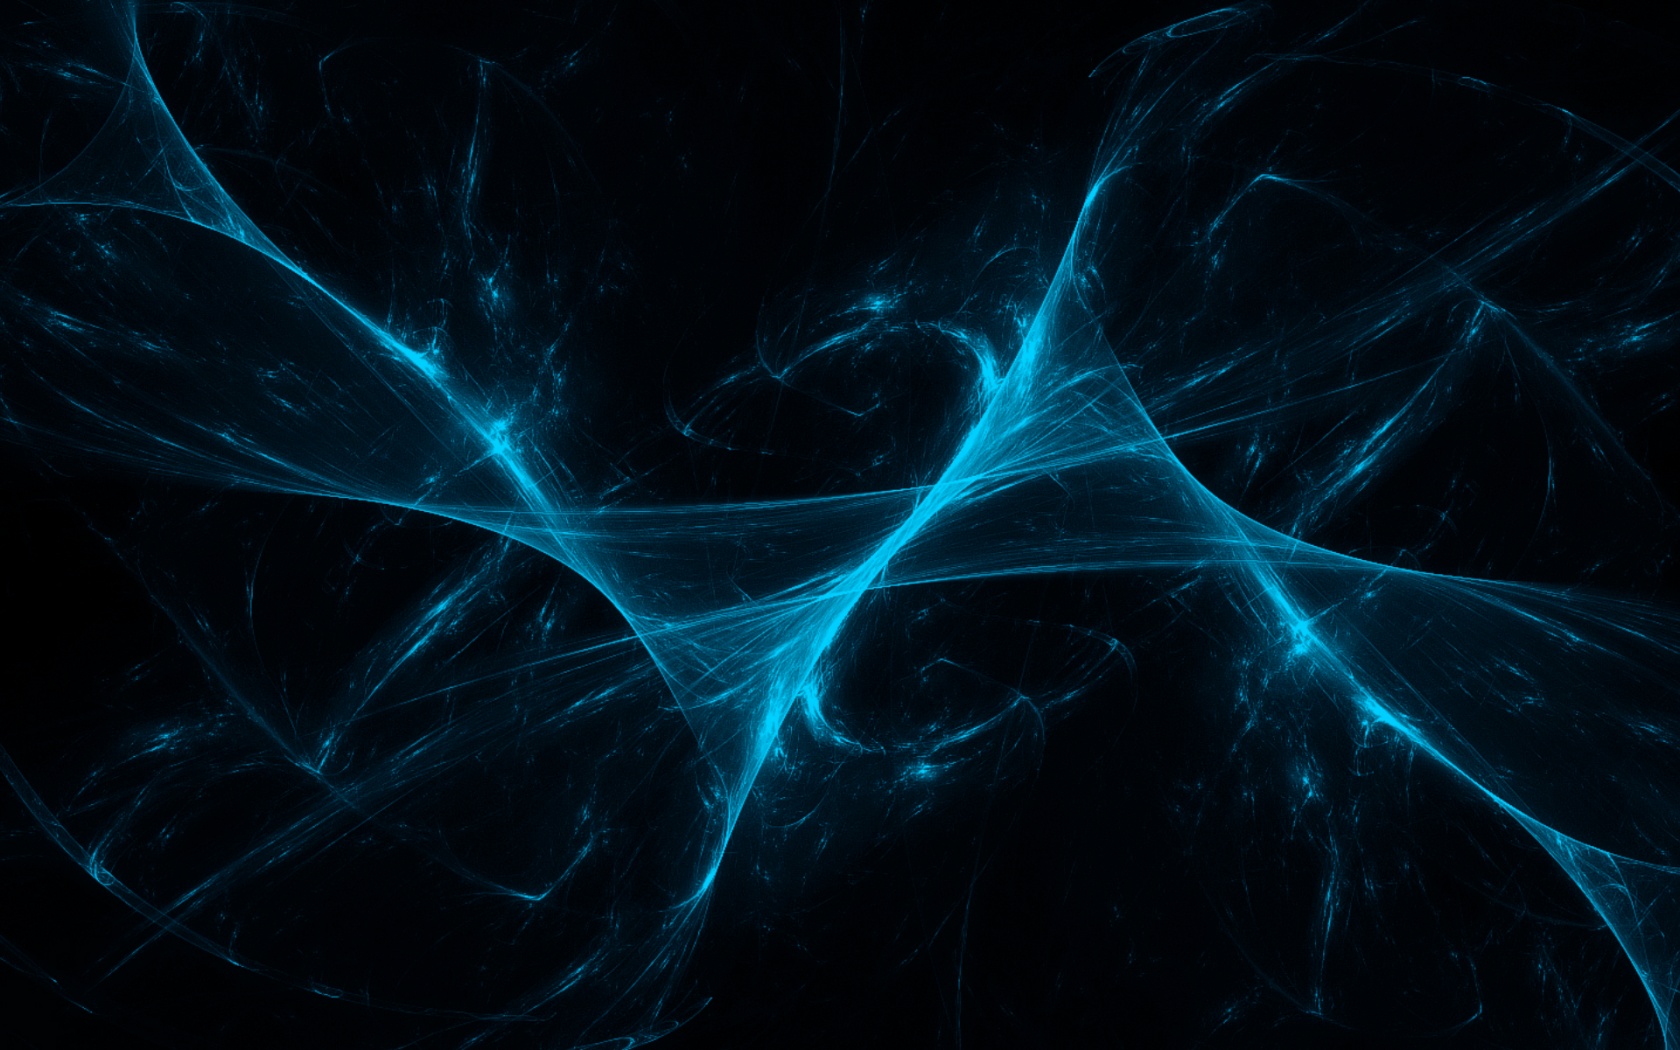 Free Download 1680x1050 Abstract Desktop Pc And Mac Wallpaper 1680x1050 For Your Desktop Mobile Tablet Explore 49 Wallpaper 1680 X 1050 1680 X 1050 Hd Wallpaper Wallpaper For Windows 10 1680x1050 1680 X 1050 Christmas Wallpaper